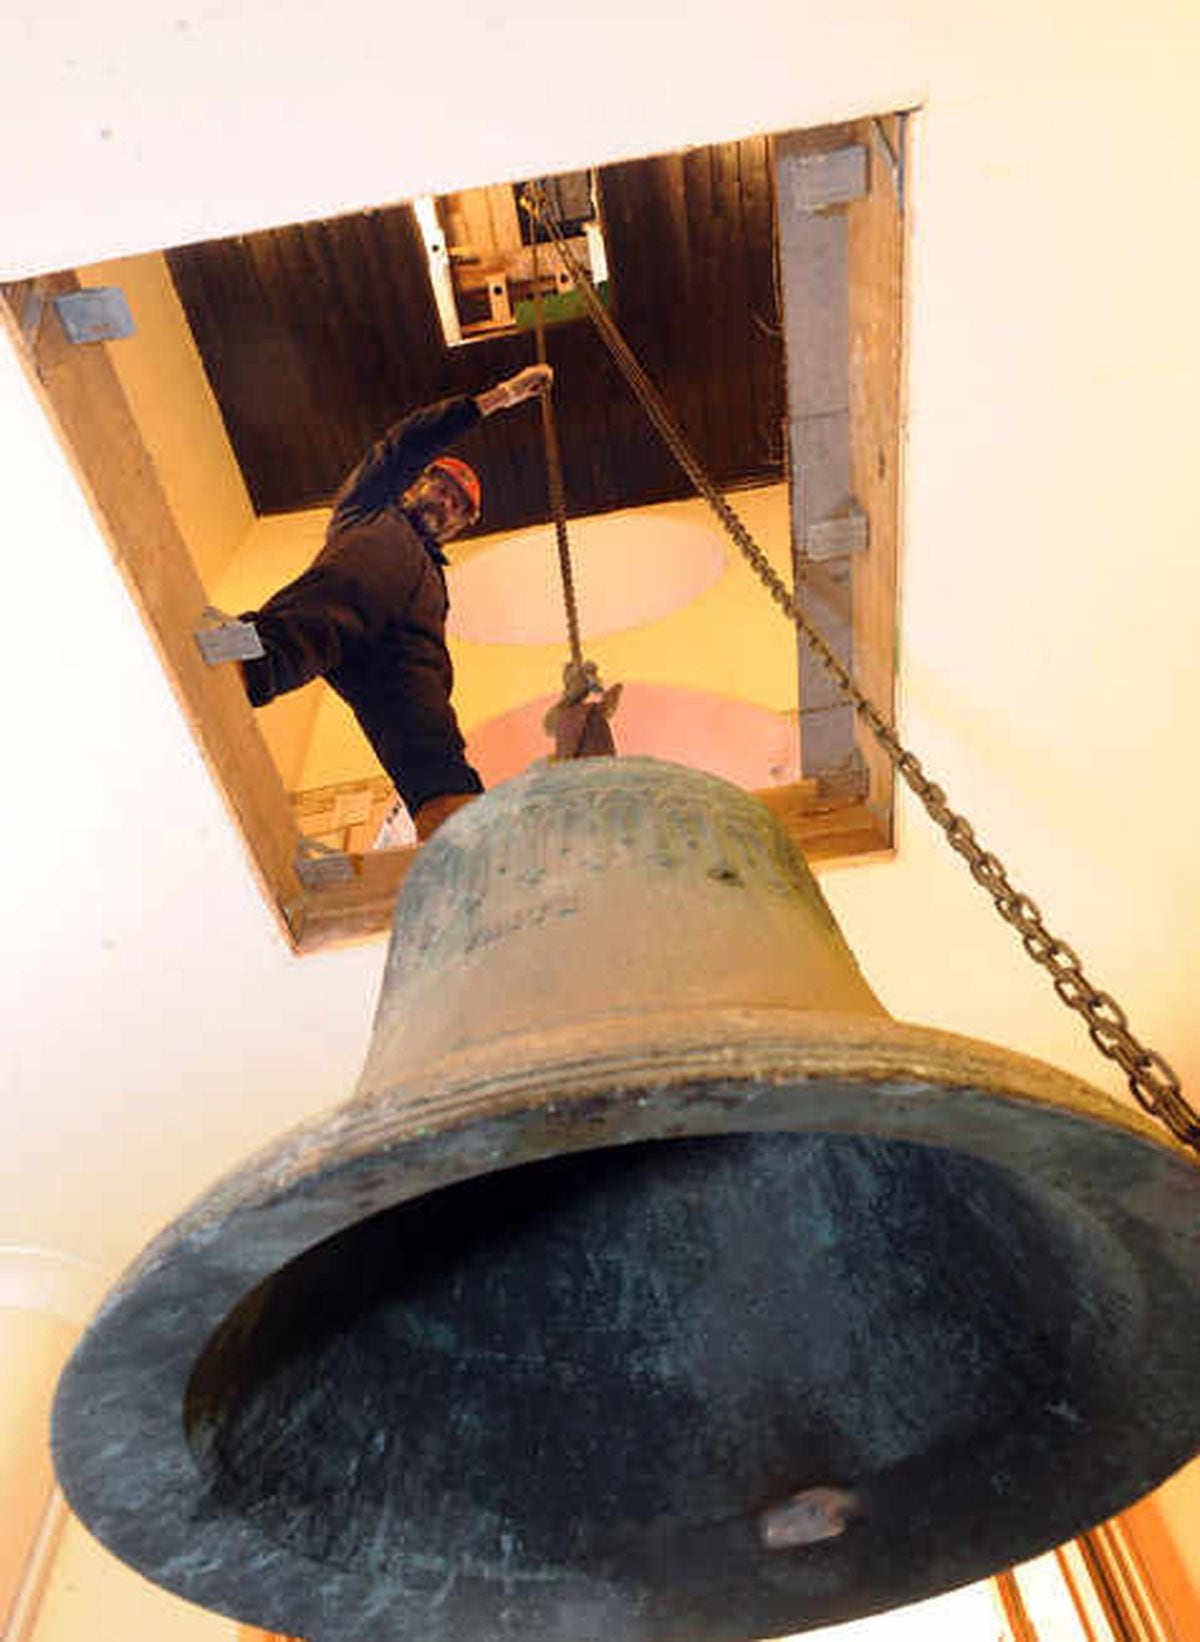 Church bells ring the changes after 120 years | Express & Star